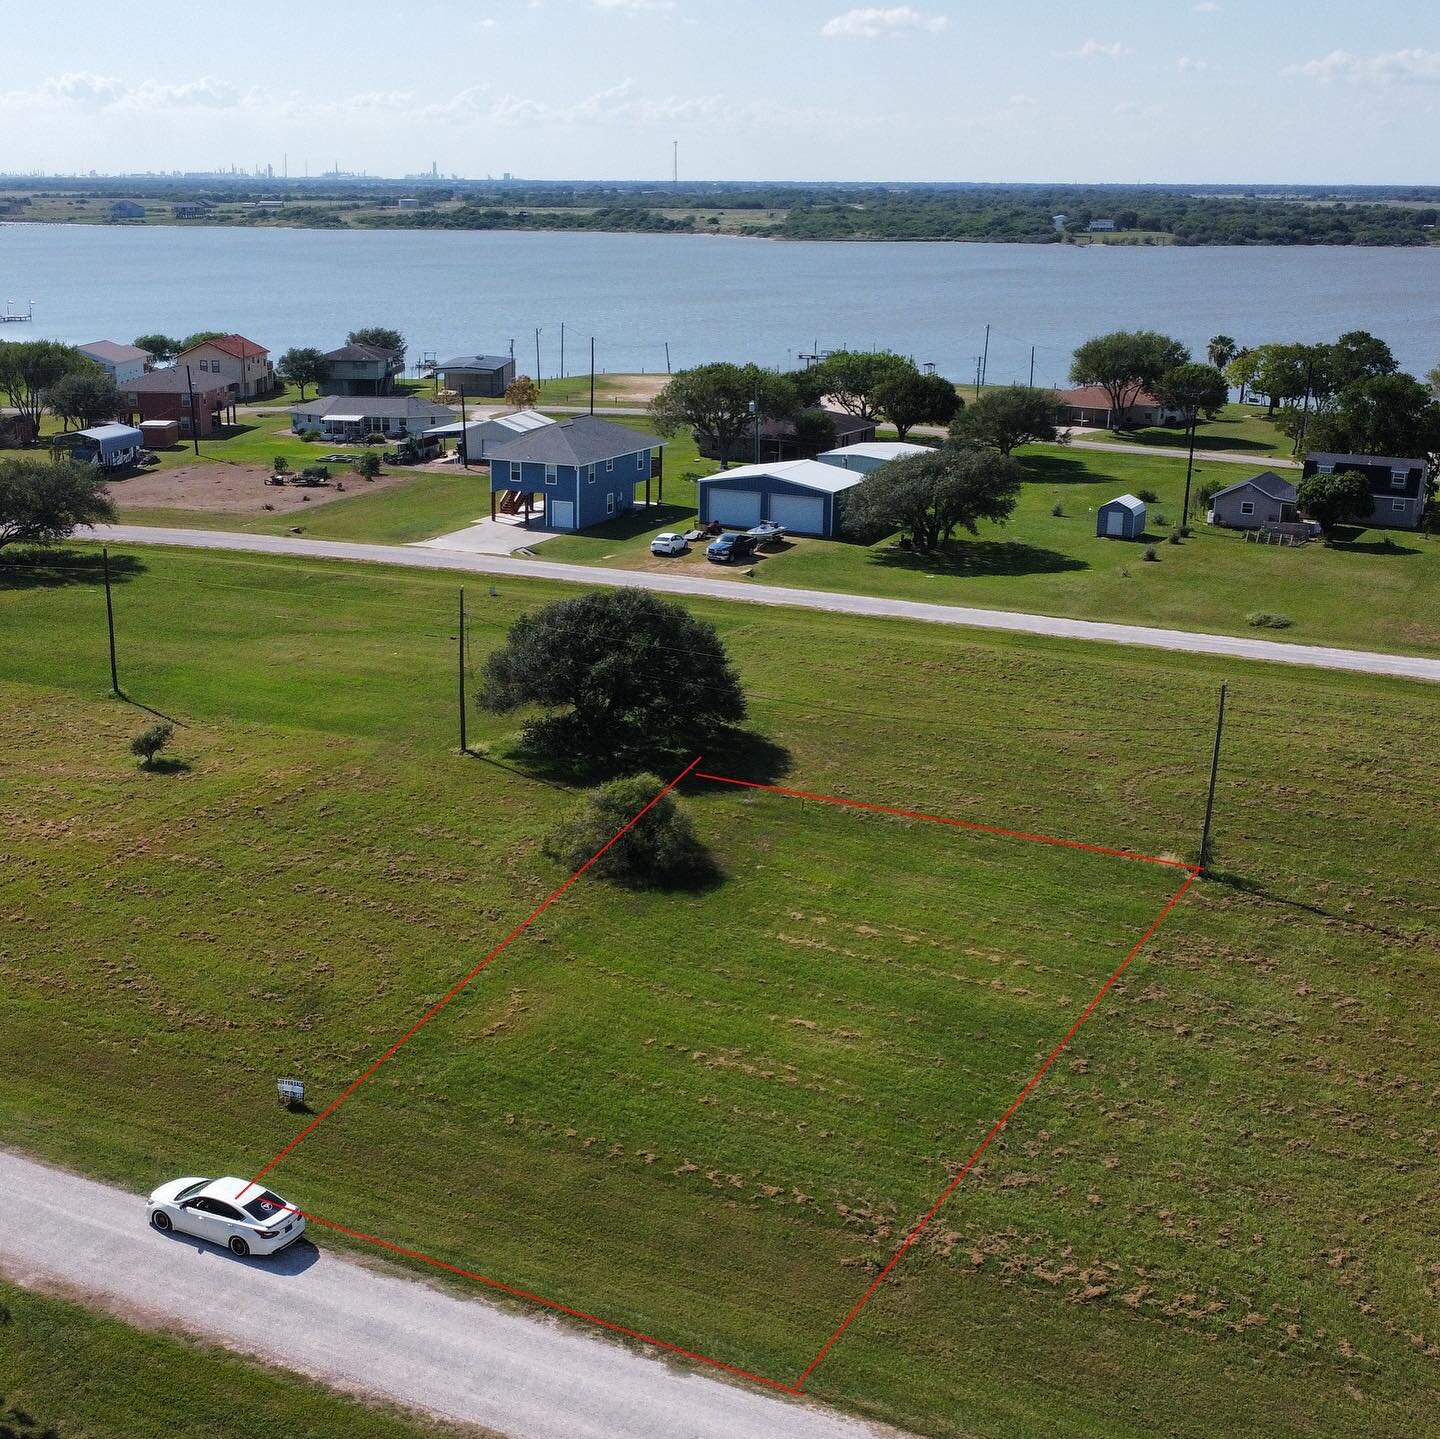 ❌SOLD❌Beautiful 😍 7,000 Sqft lot for sale in a gated community out in Palacios,Tx 
 
Call Us Now For More Details
346-235-6767

#capecarancahua #palaciostx #waterfront #land #lotforsale #landforsalebytheowner